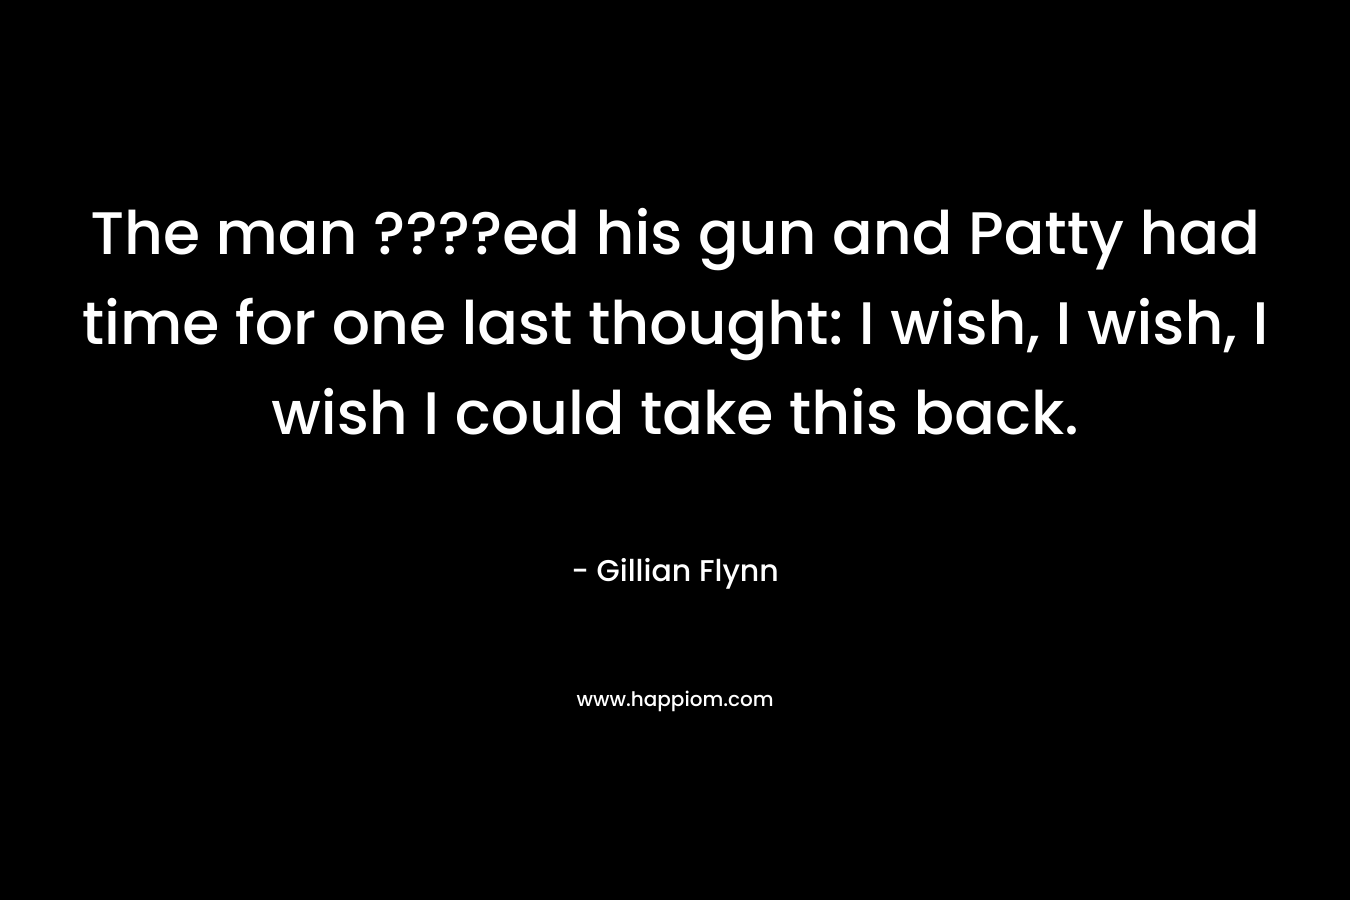 The man ????ed his gun and Patty had time for one last thought: I wish, I wish, I wish I could take this back.